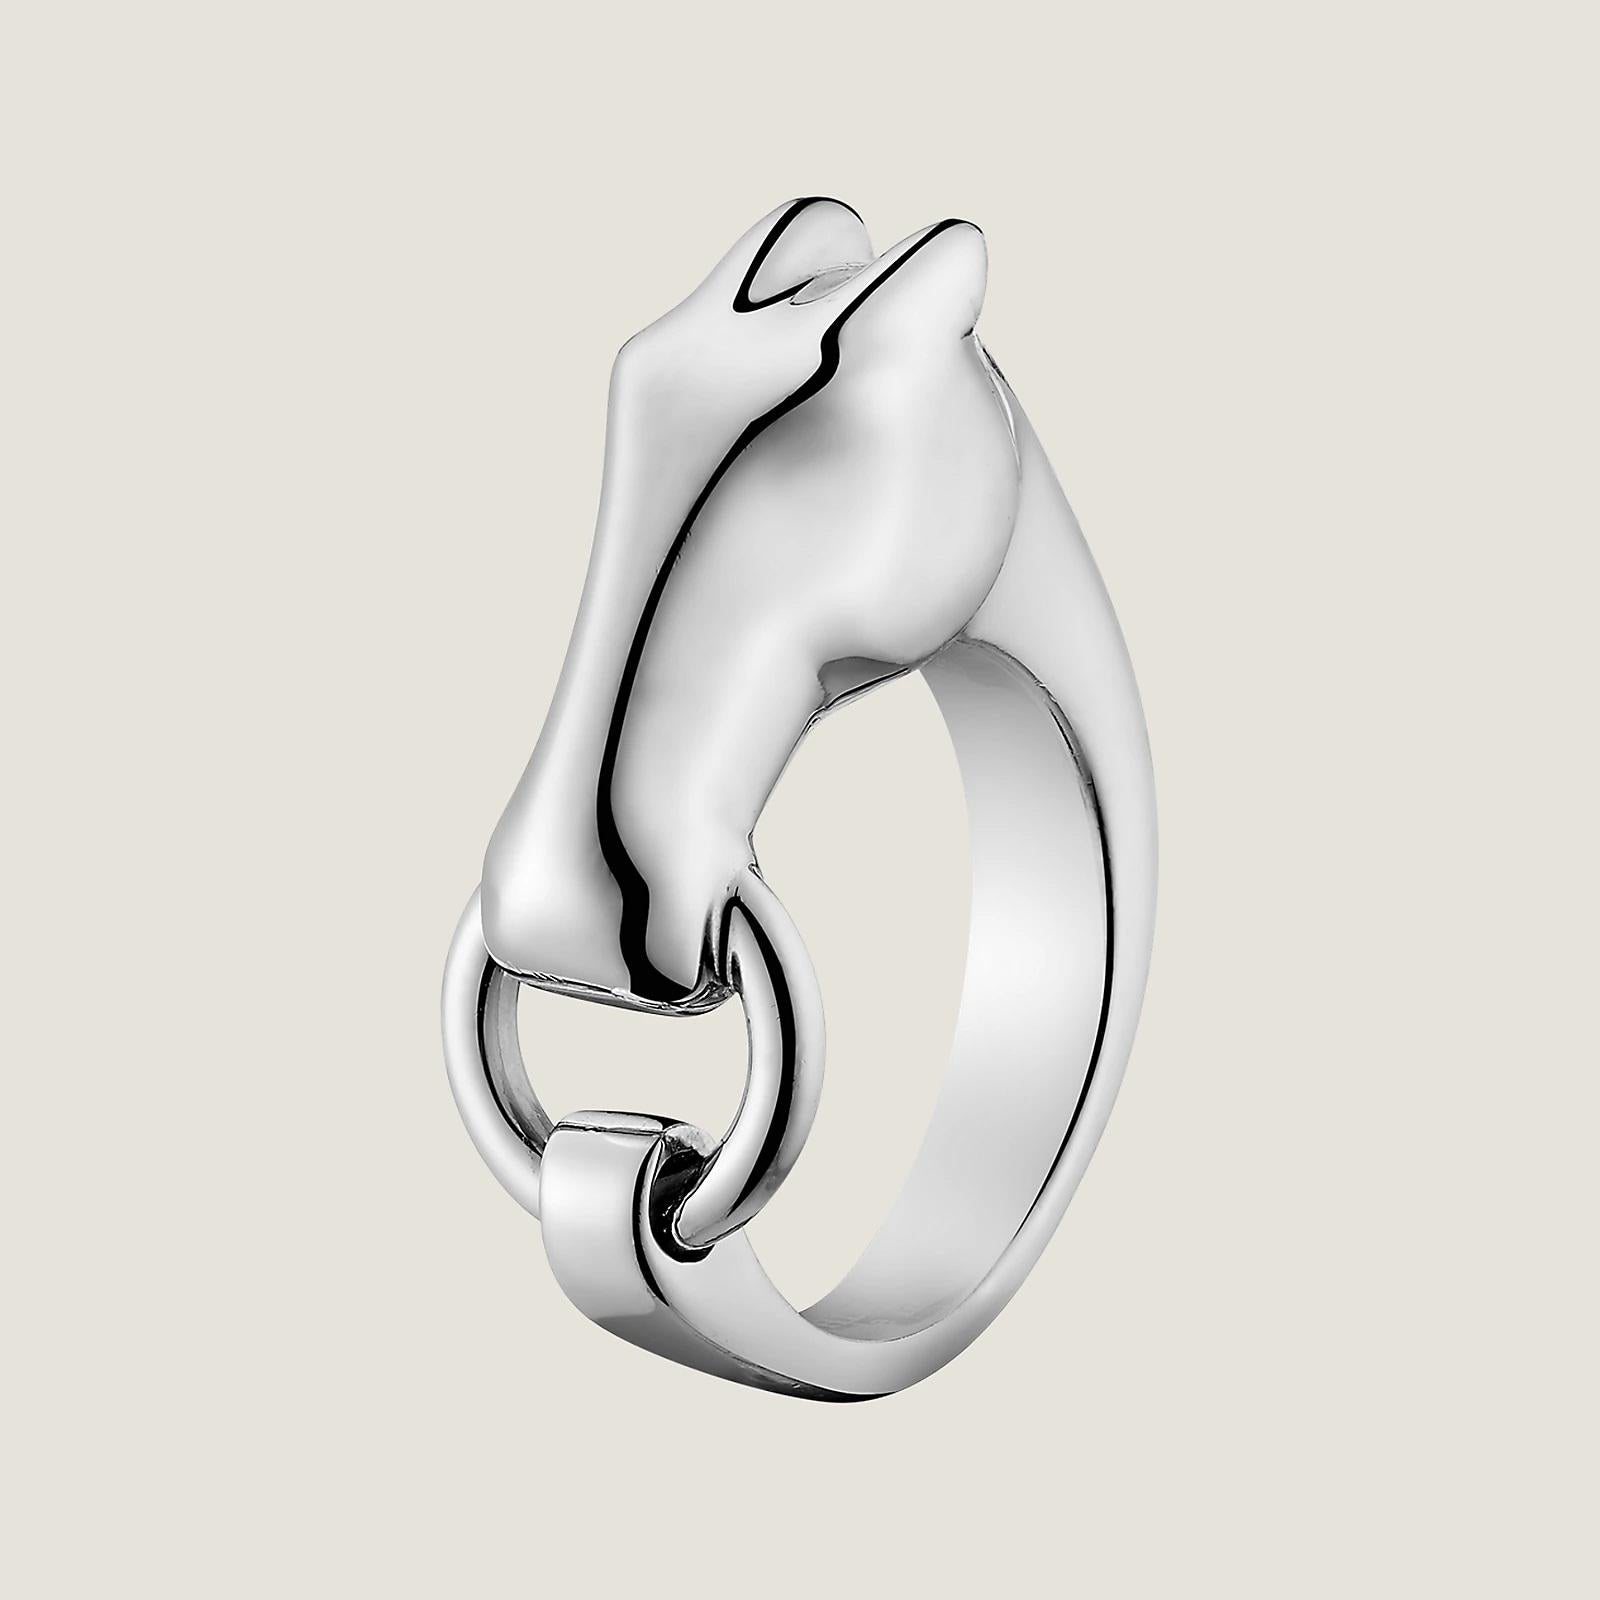 Size 47mm us 4
Ring in sterling silver

Made in France/Italy

Silver 925/1000

Width: 0.36 cm  Motif size: 2.2 x 0.84 cm